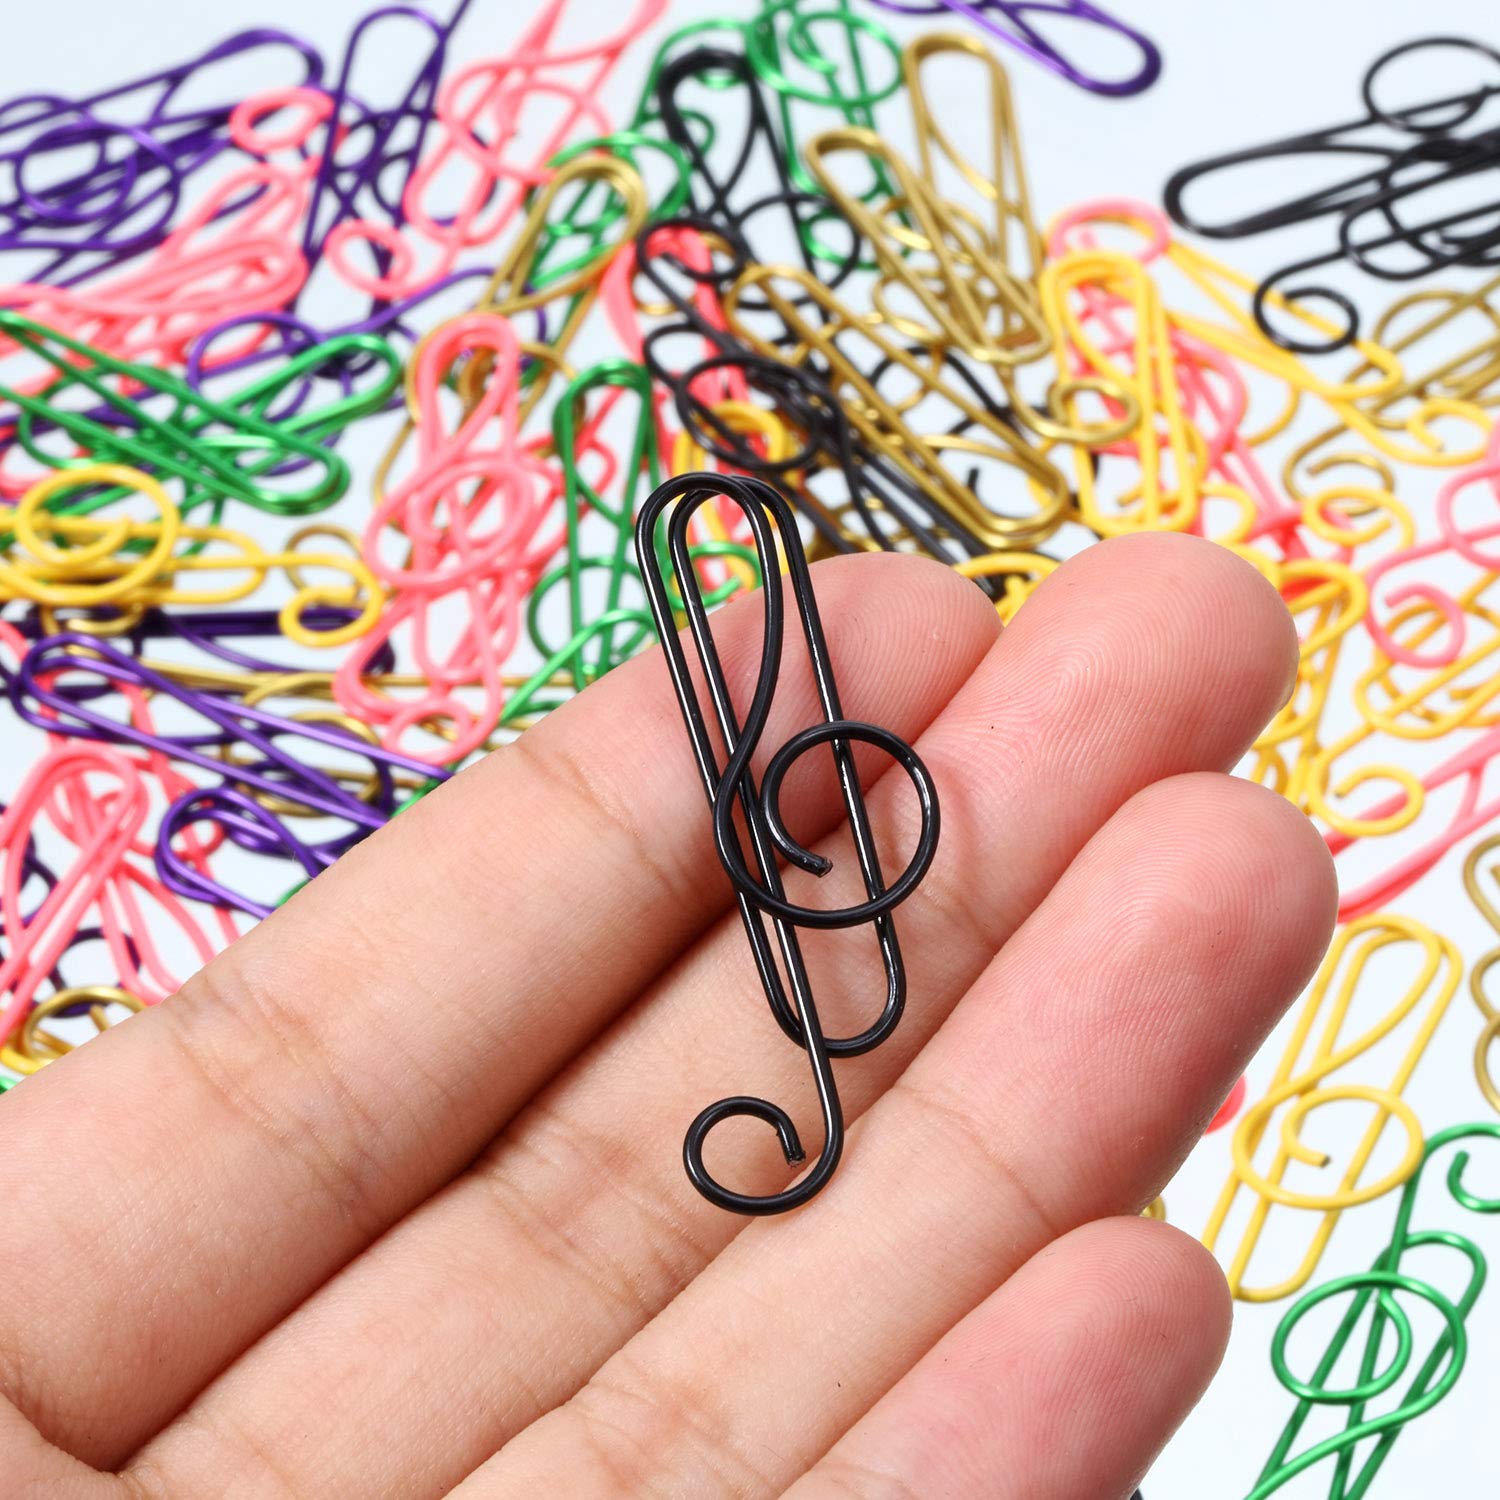 (Last Day Promotion 50% OFF) 🎵Music multicoloured metal paper clips (100 PCS)